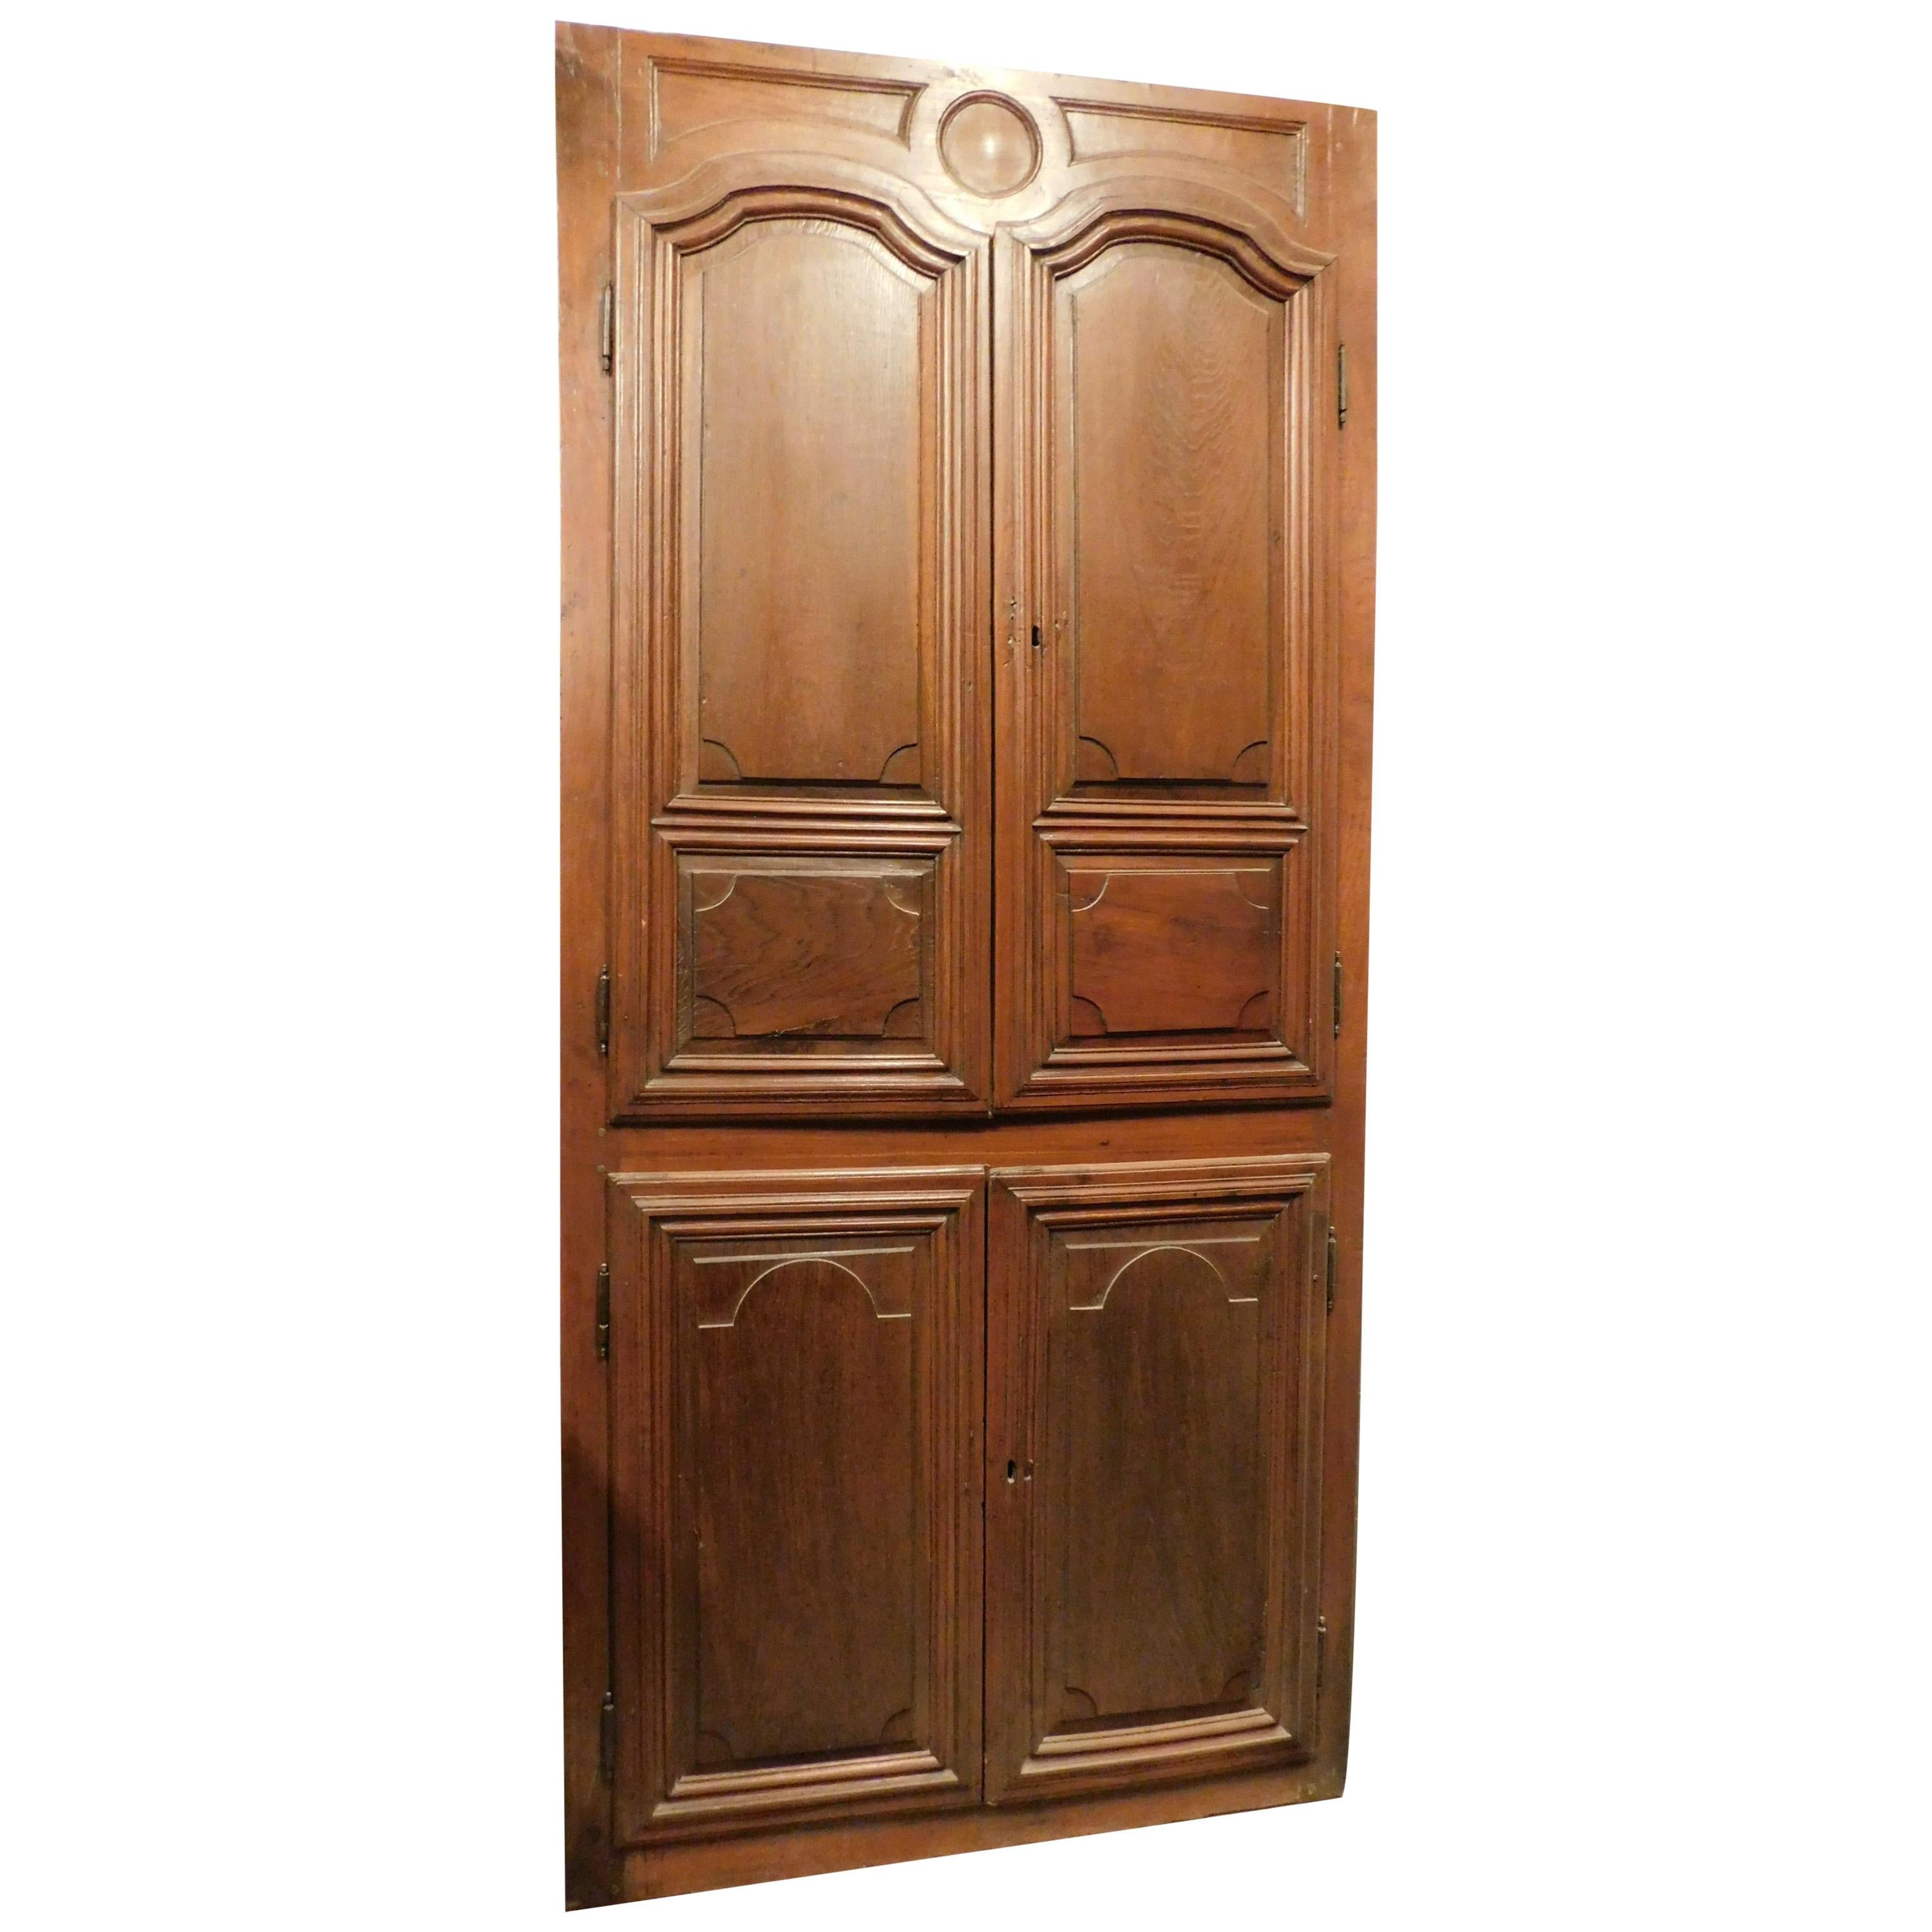 Antique Wall Cabinet Door Placard Carved Walnut, Four Doors, 18th Century, Italy For Sale